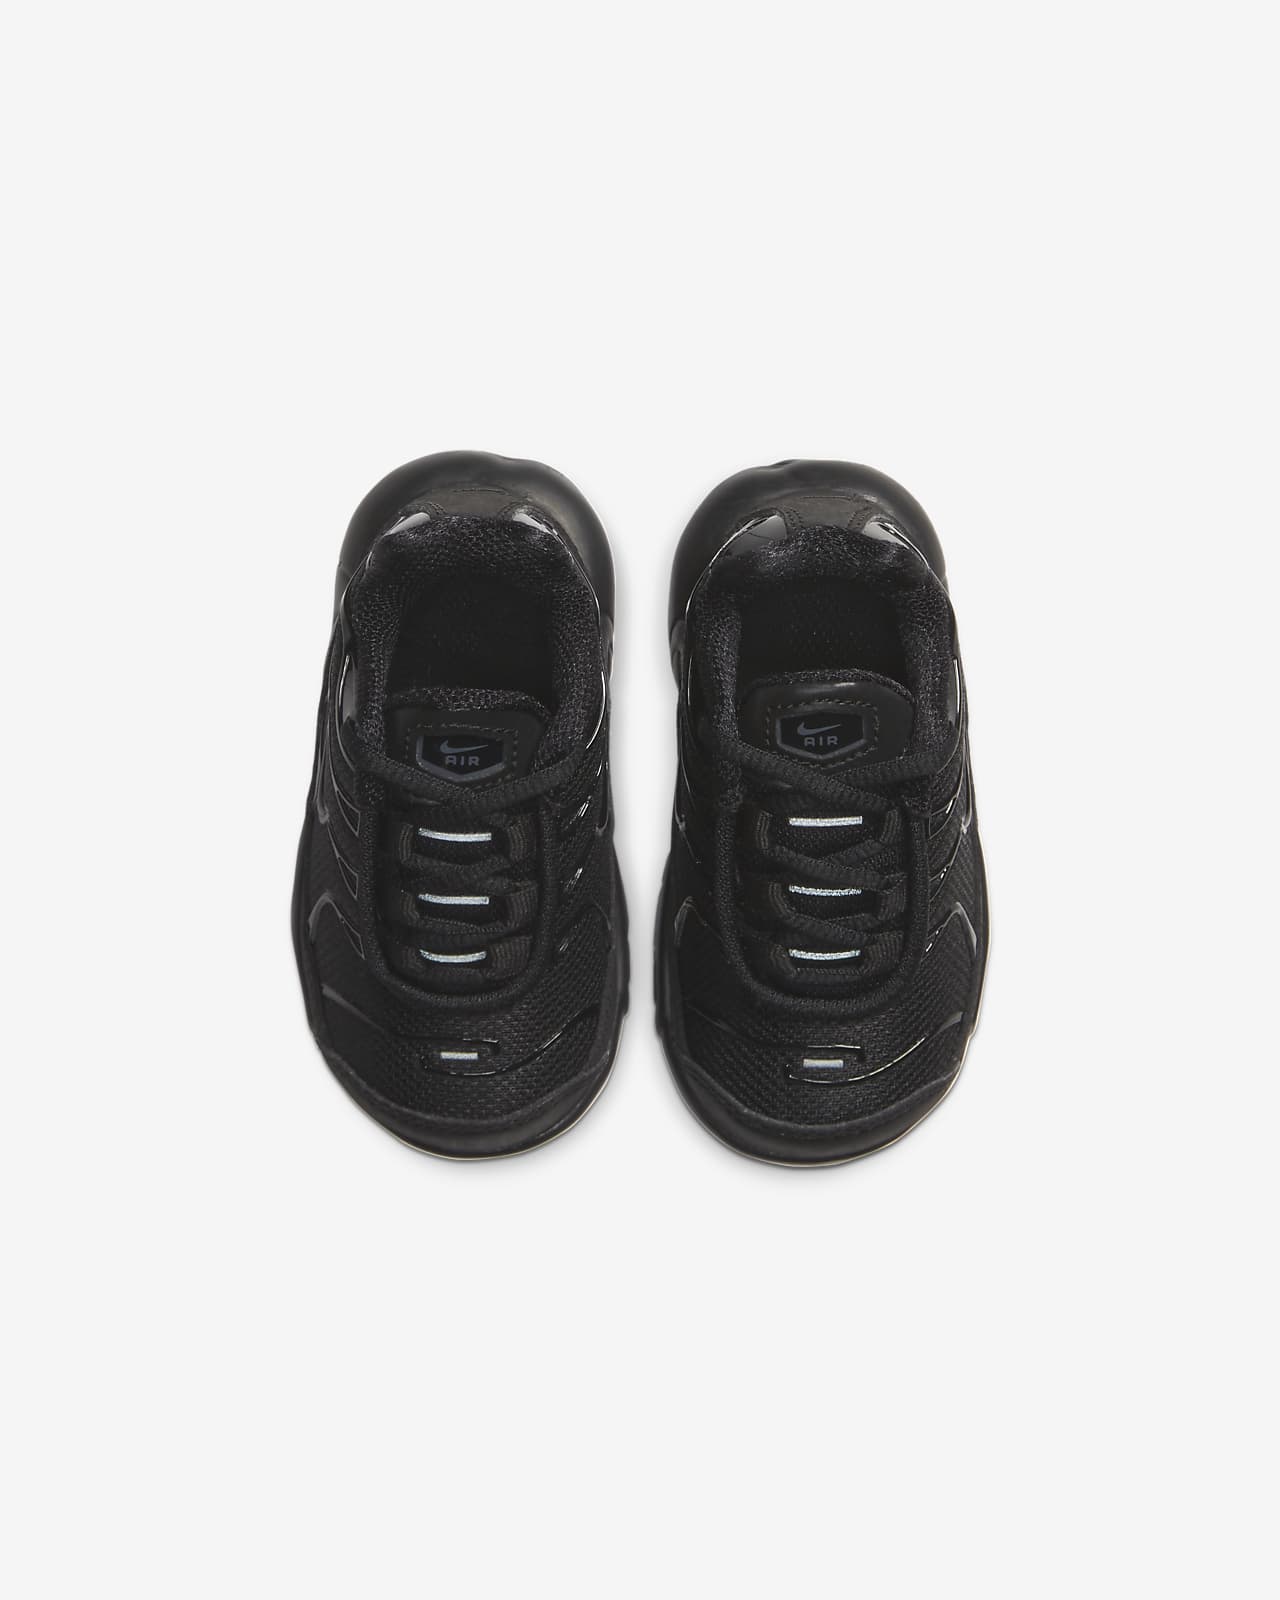 all black nike toddler shoes